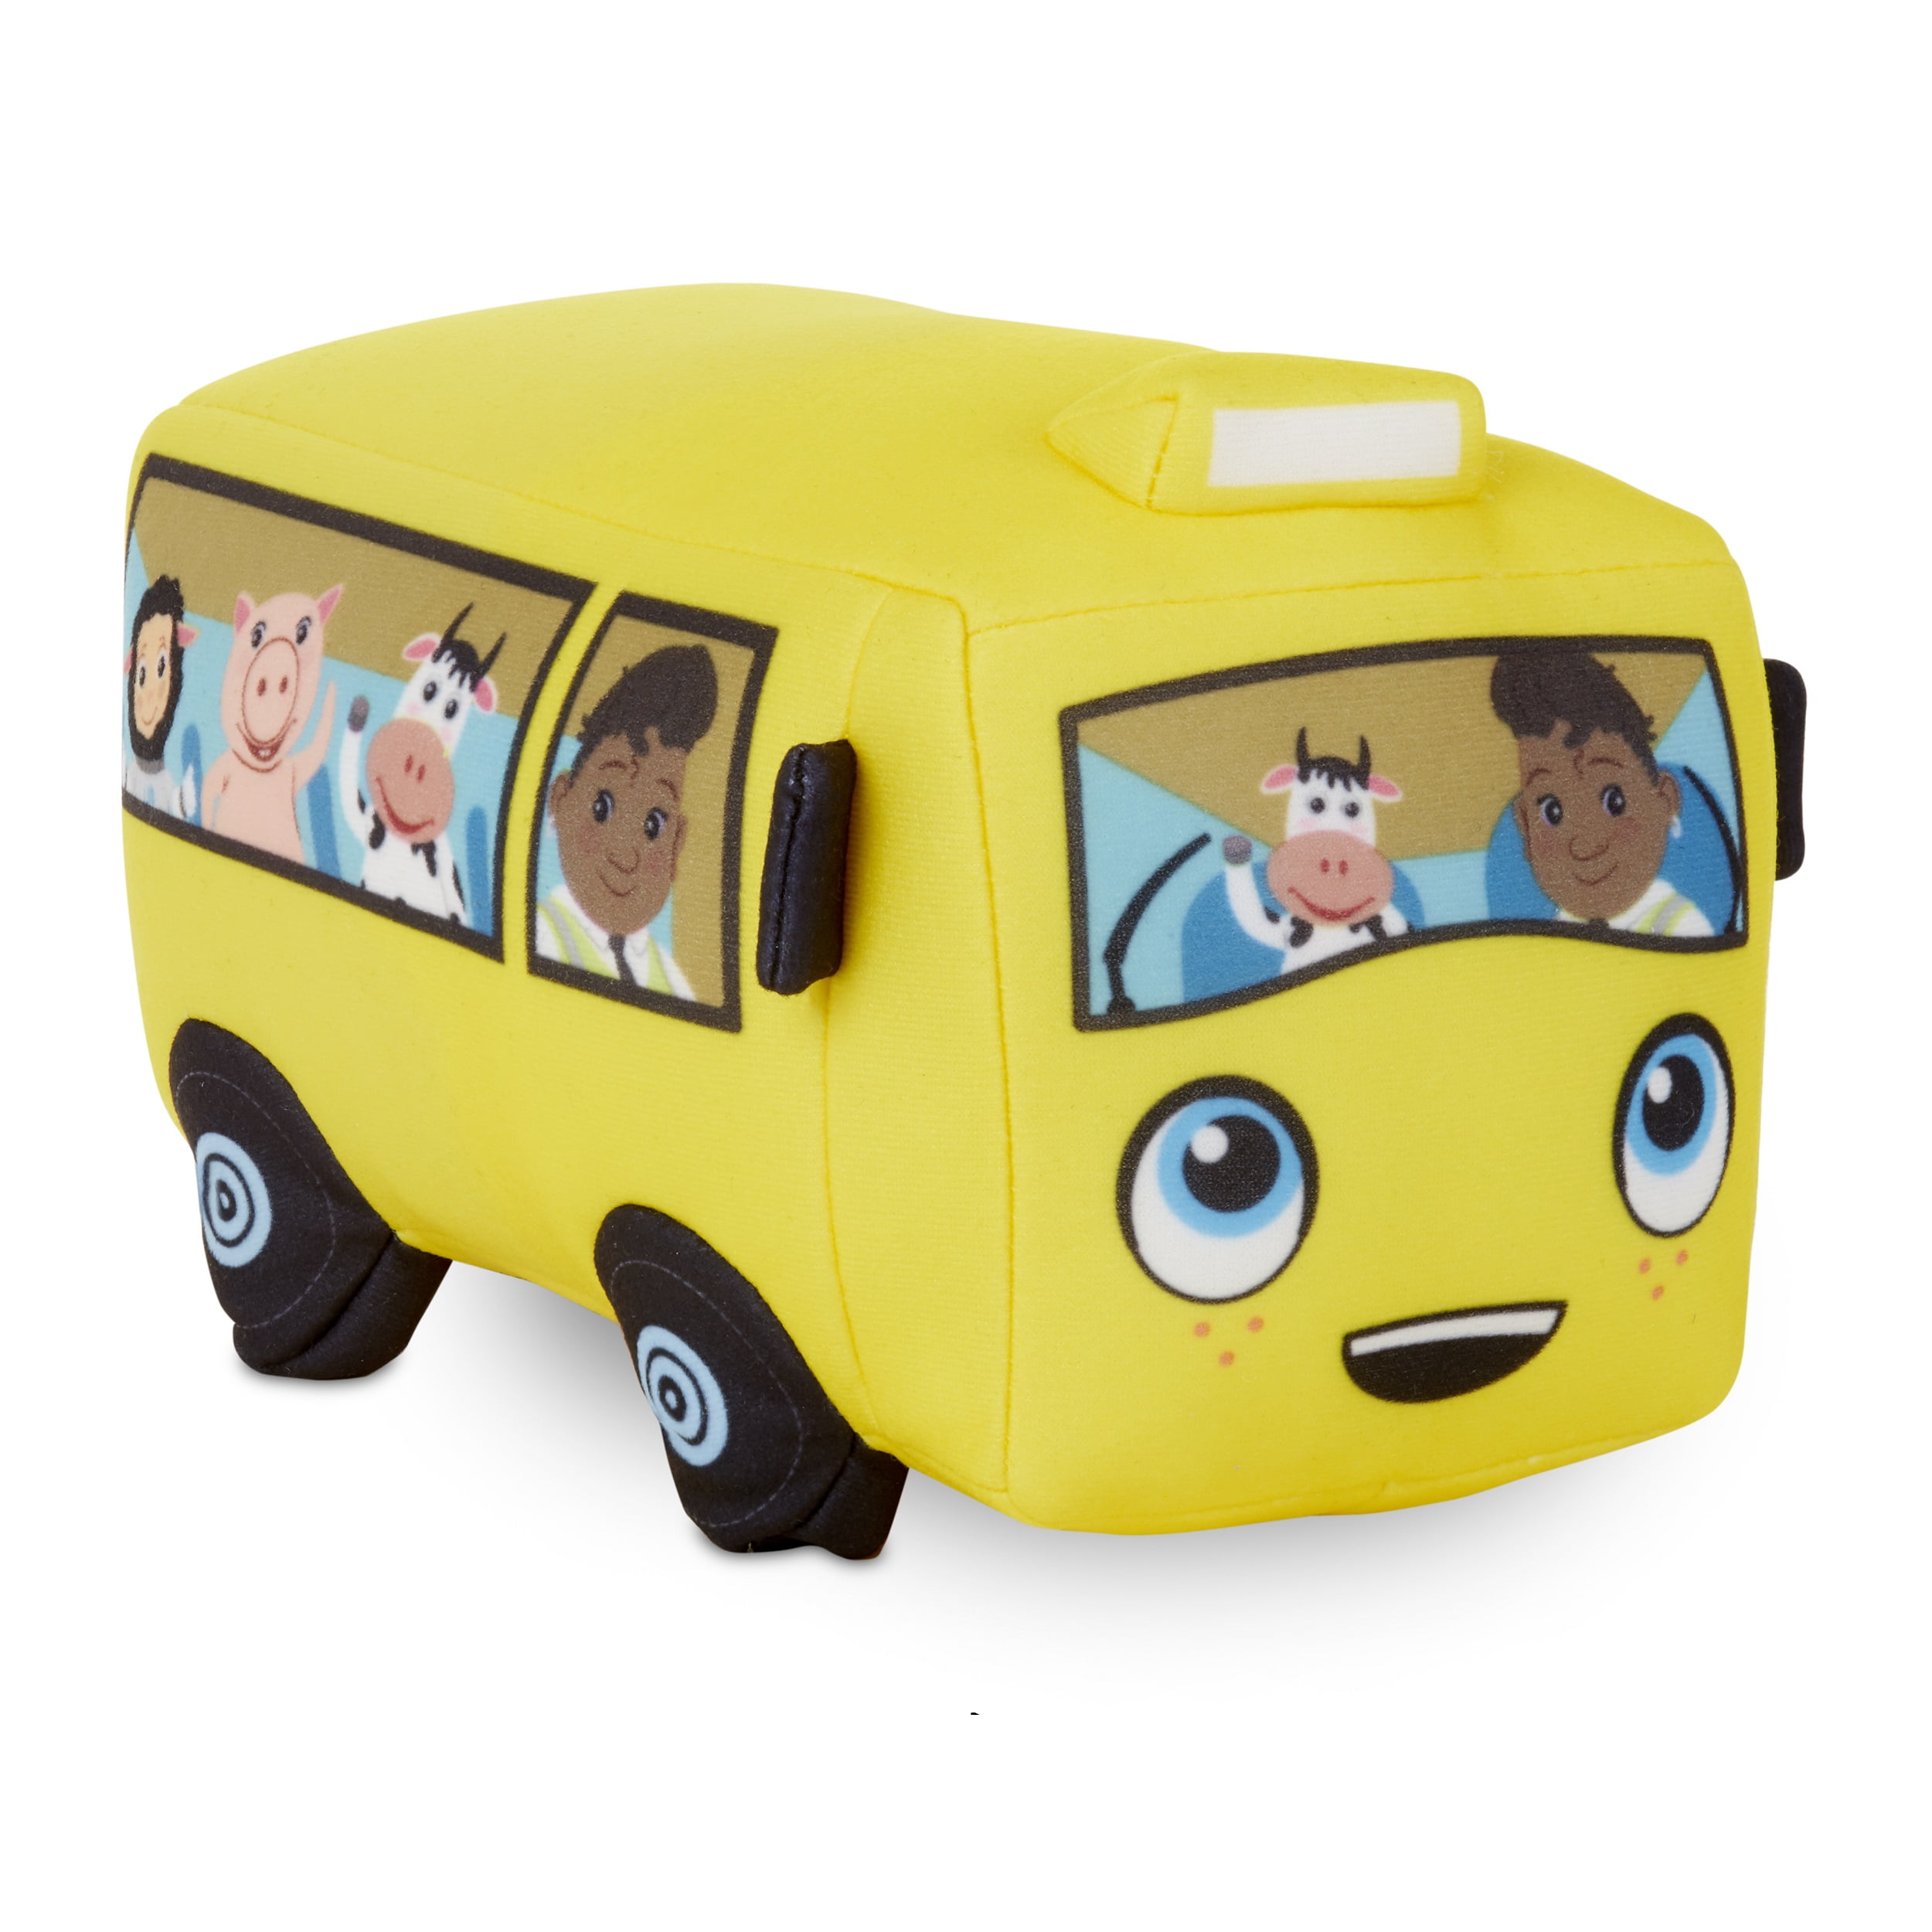 Little Baby Wiggling Wheels on Bus Official Plush Toy by Little Tikes Walmart.com